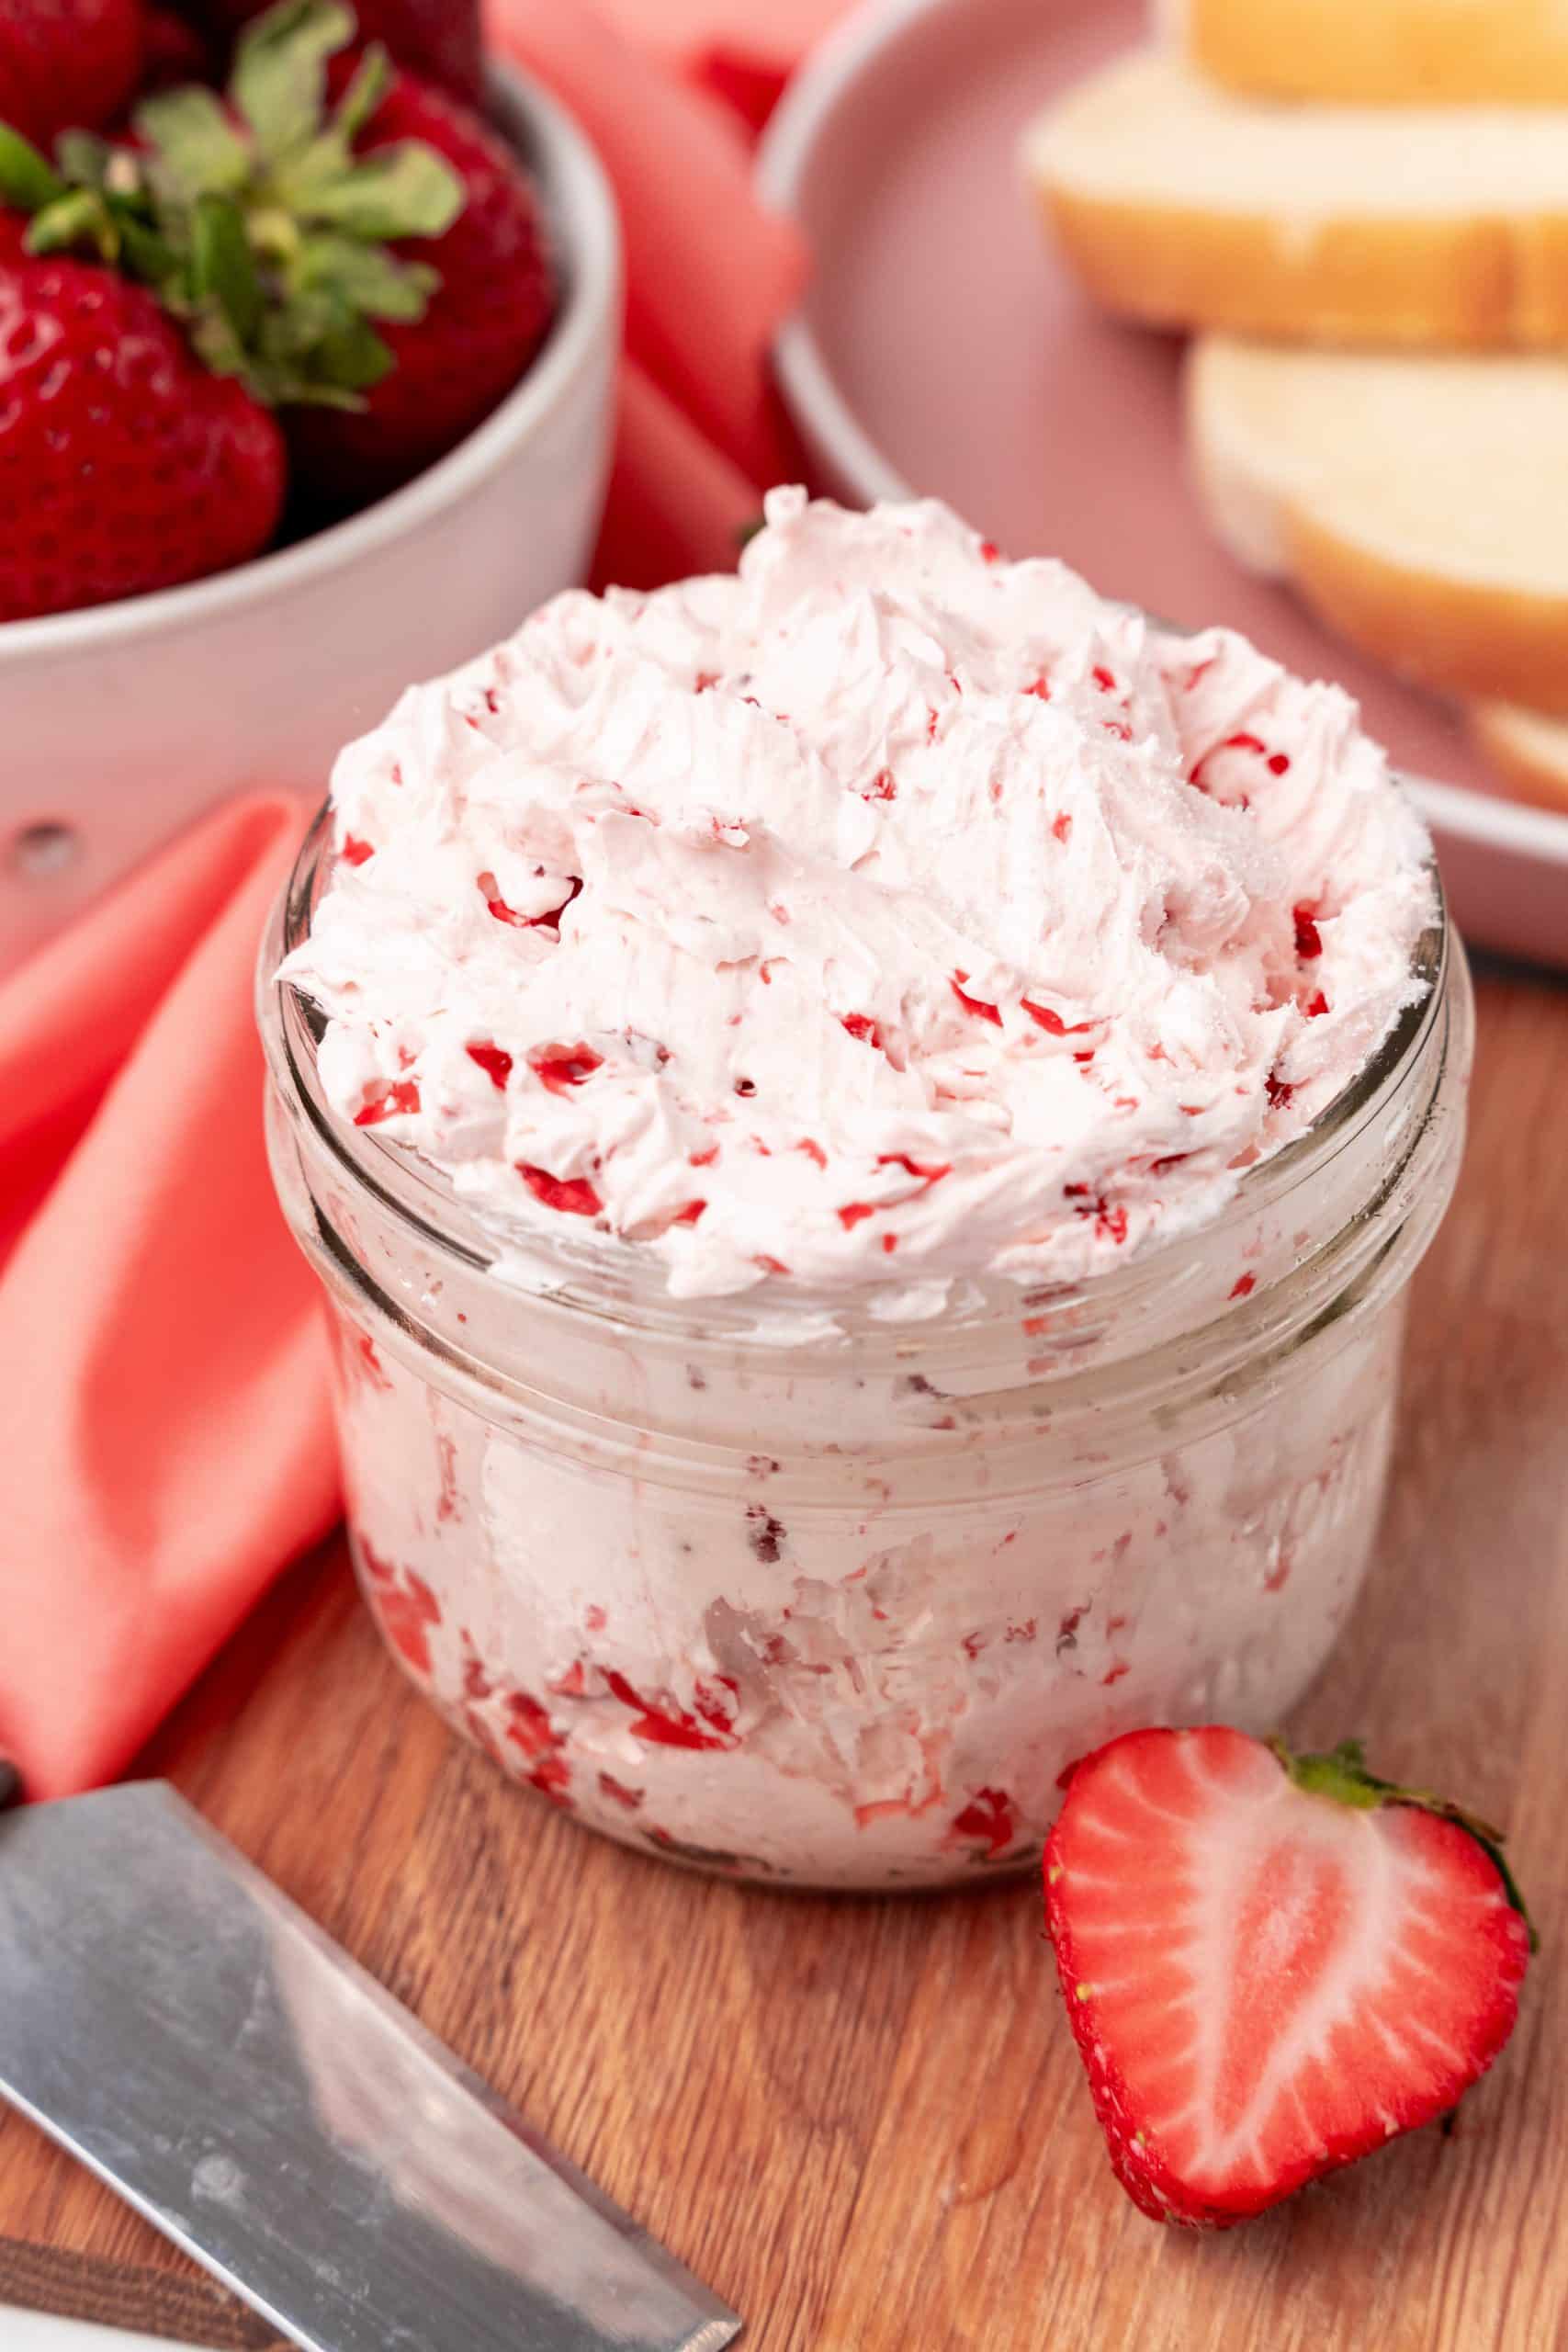 homemade strawberry butter recipe in a small glass jar on a wooden cutting board